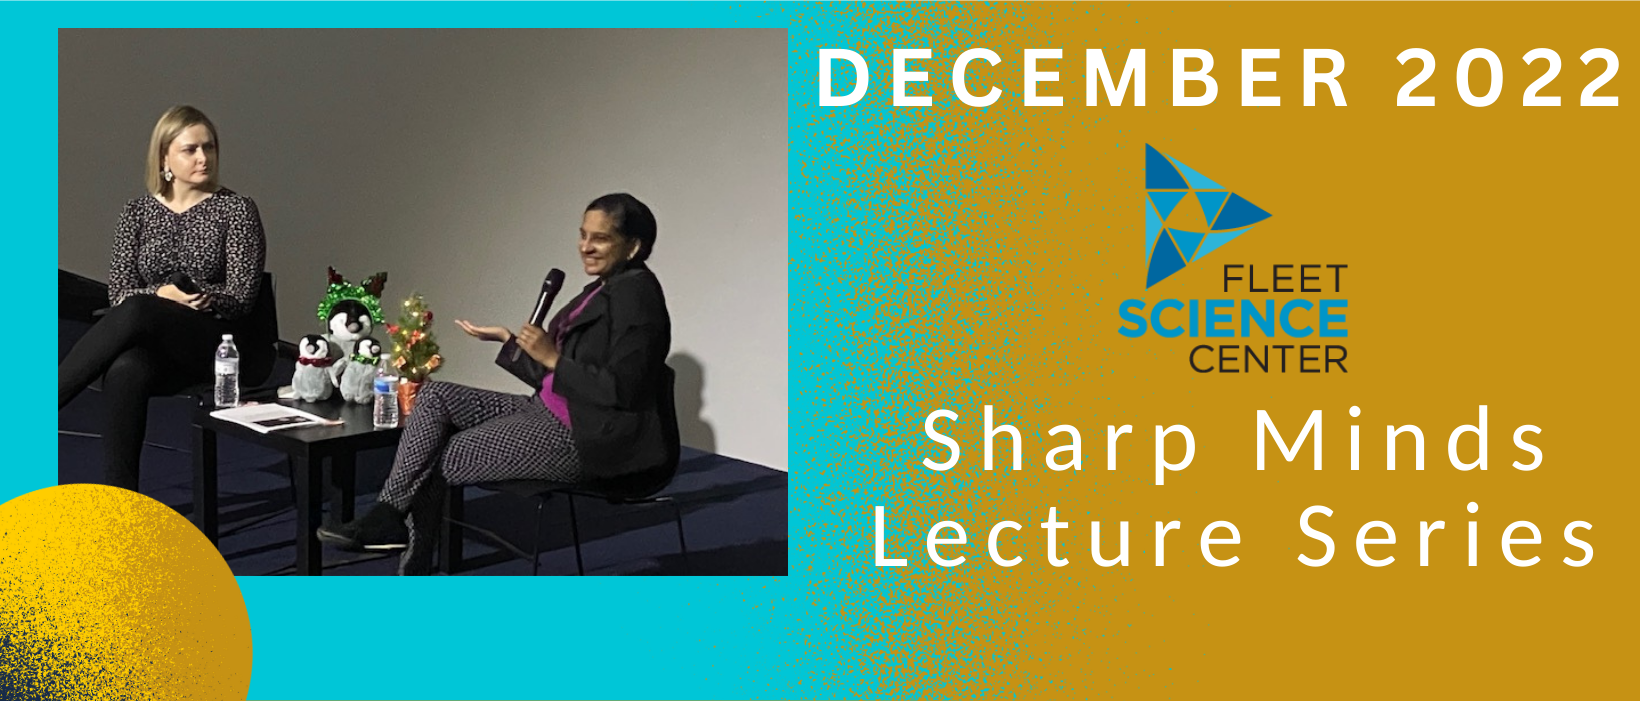 6 of 6, Ramya Rajagopalan and Caryn Rubanovich sit on stage at The Fleet Science Center presenting the 2022 December Sharp Minds Lecture